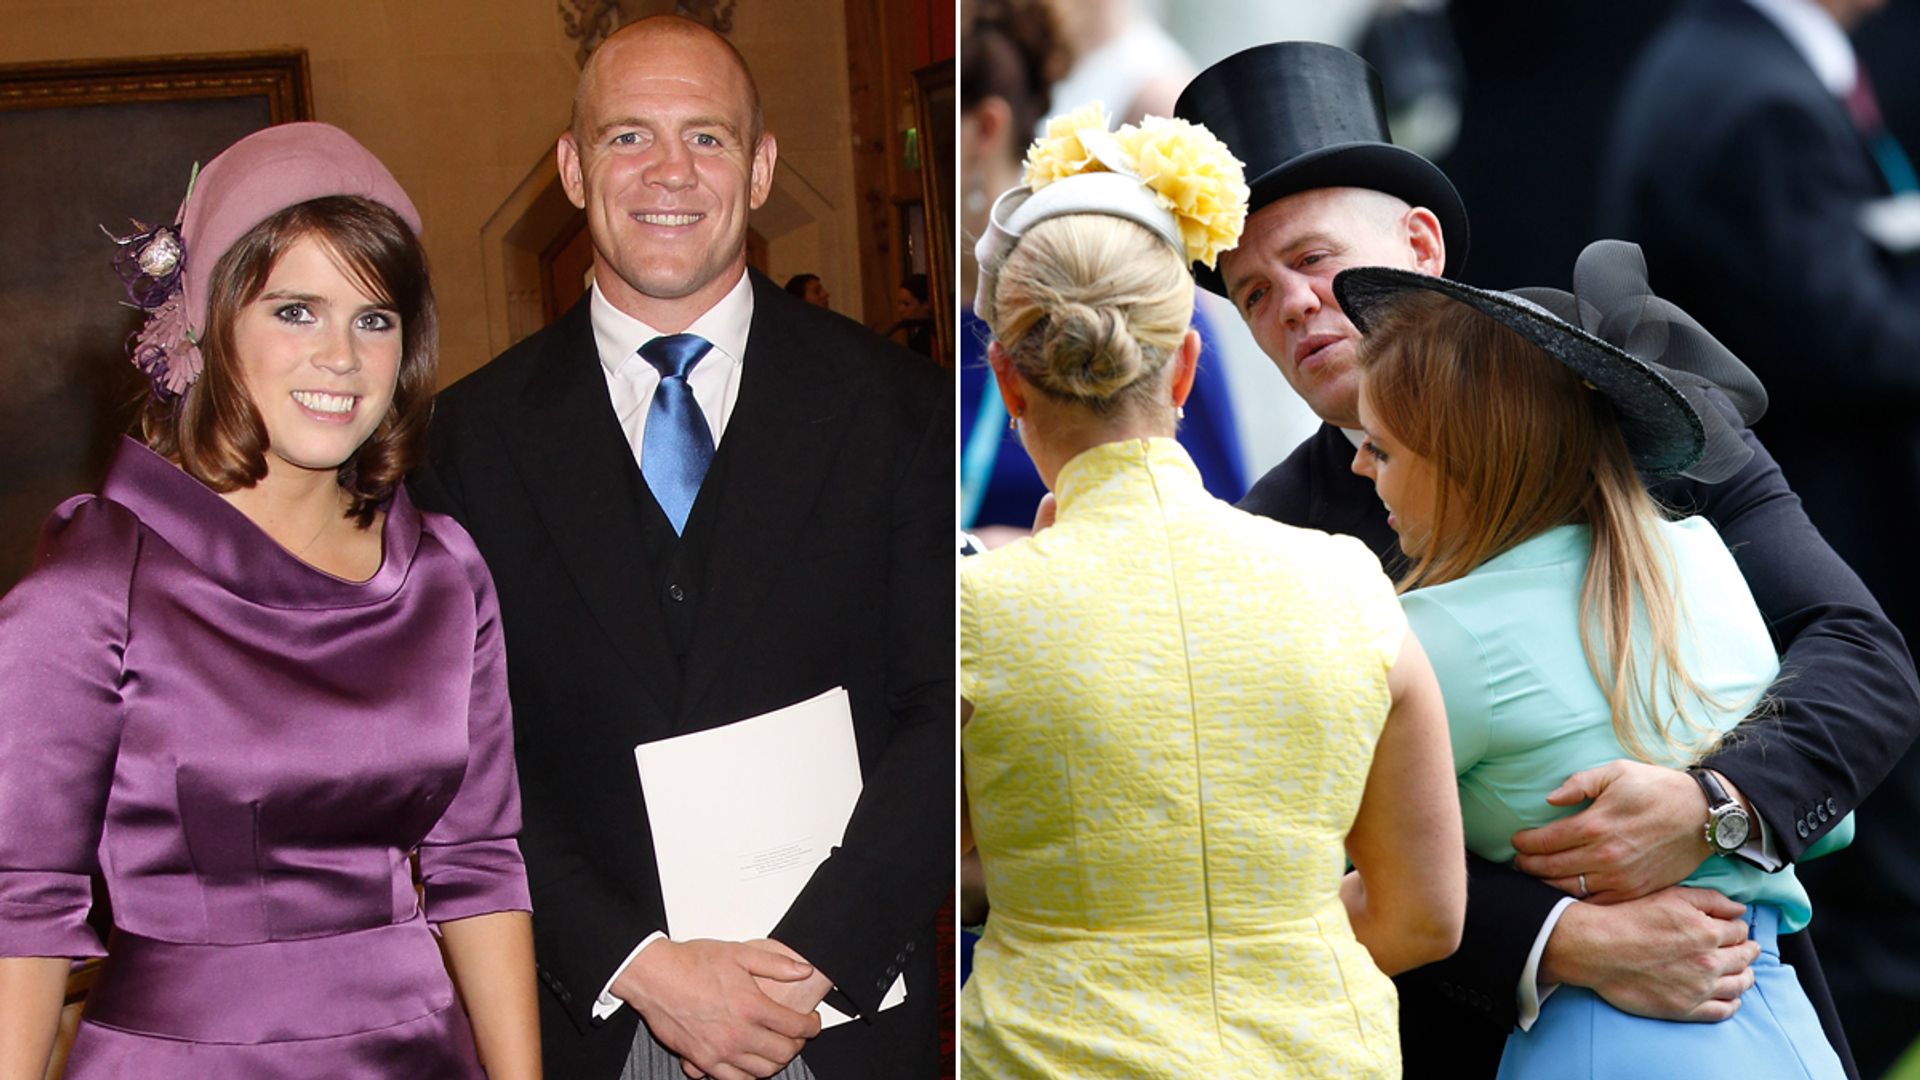 Mike Tindall's incredible bond with royal cousins Princess Beatrice and Princess Eugenie in photos